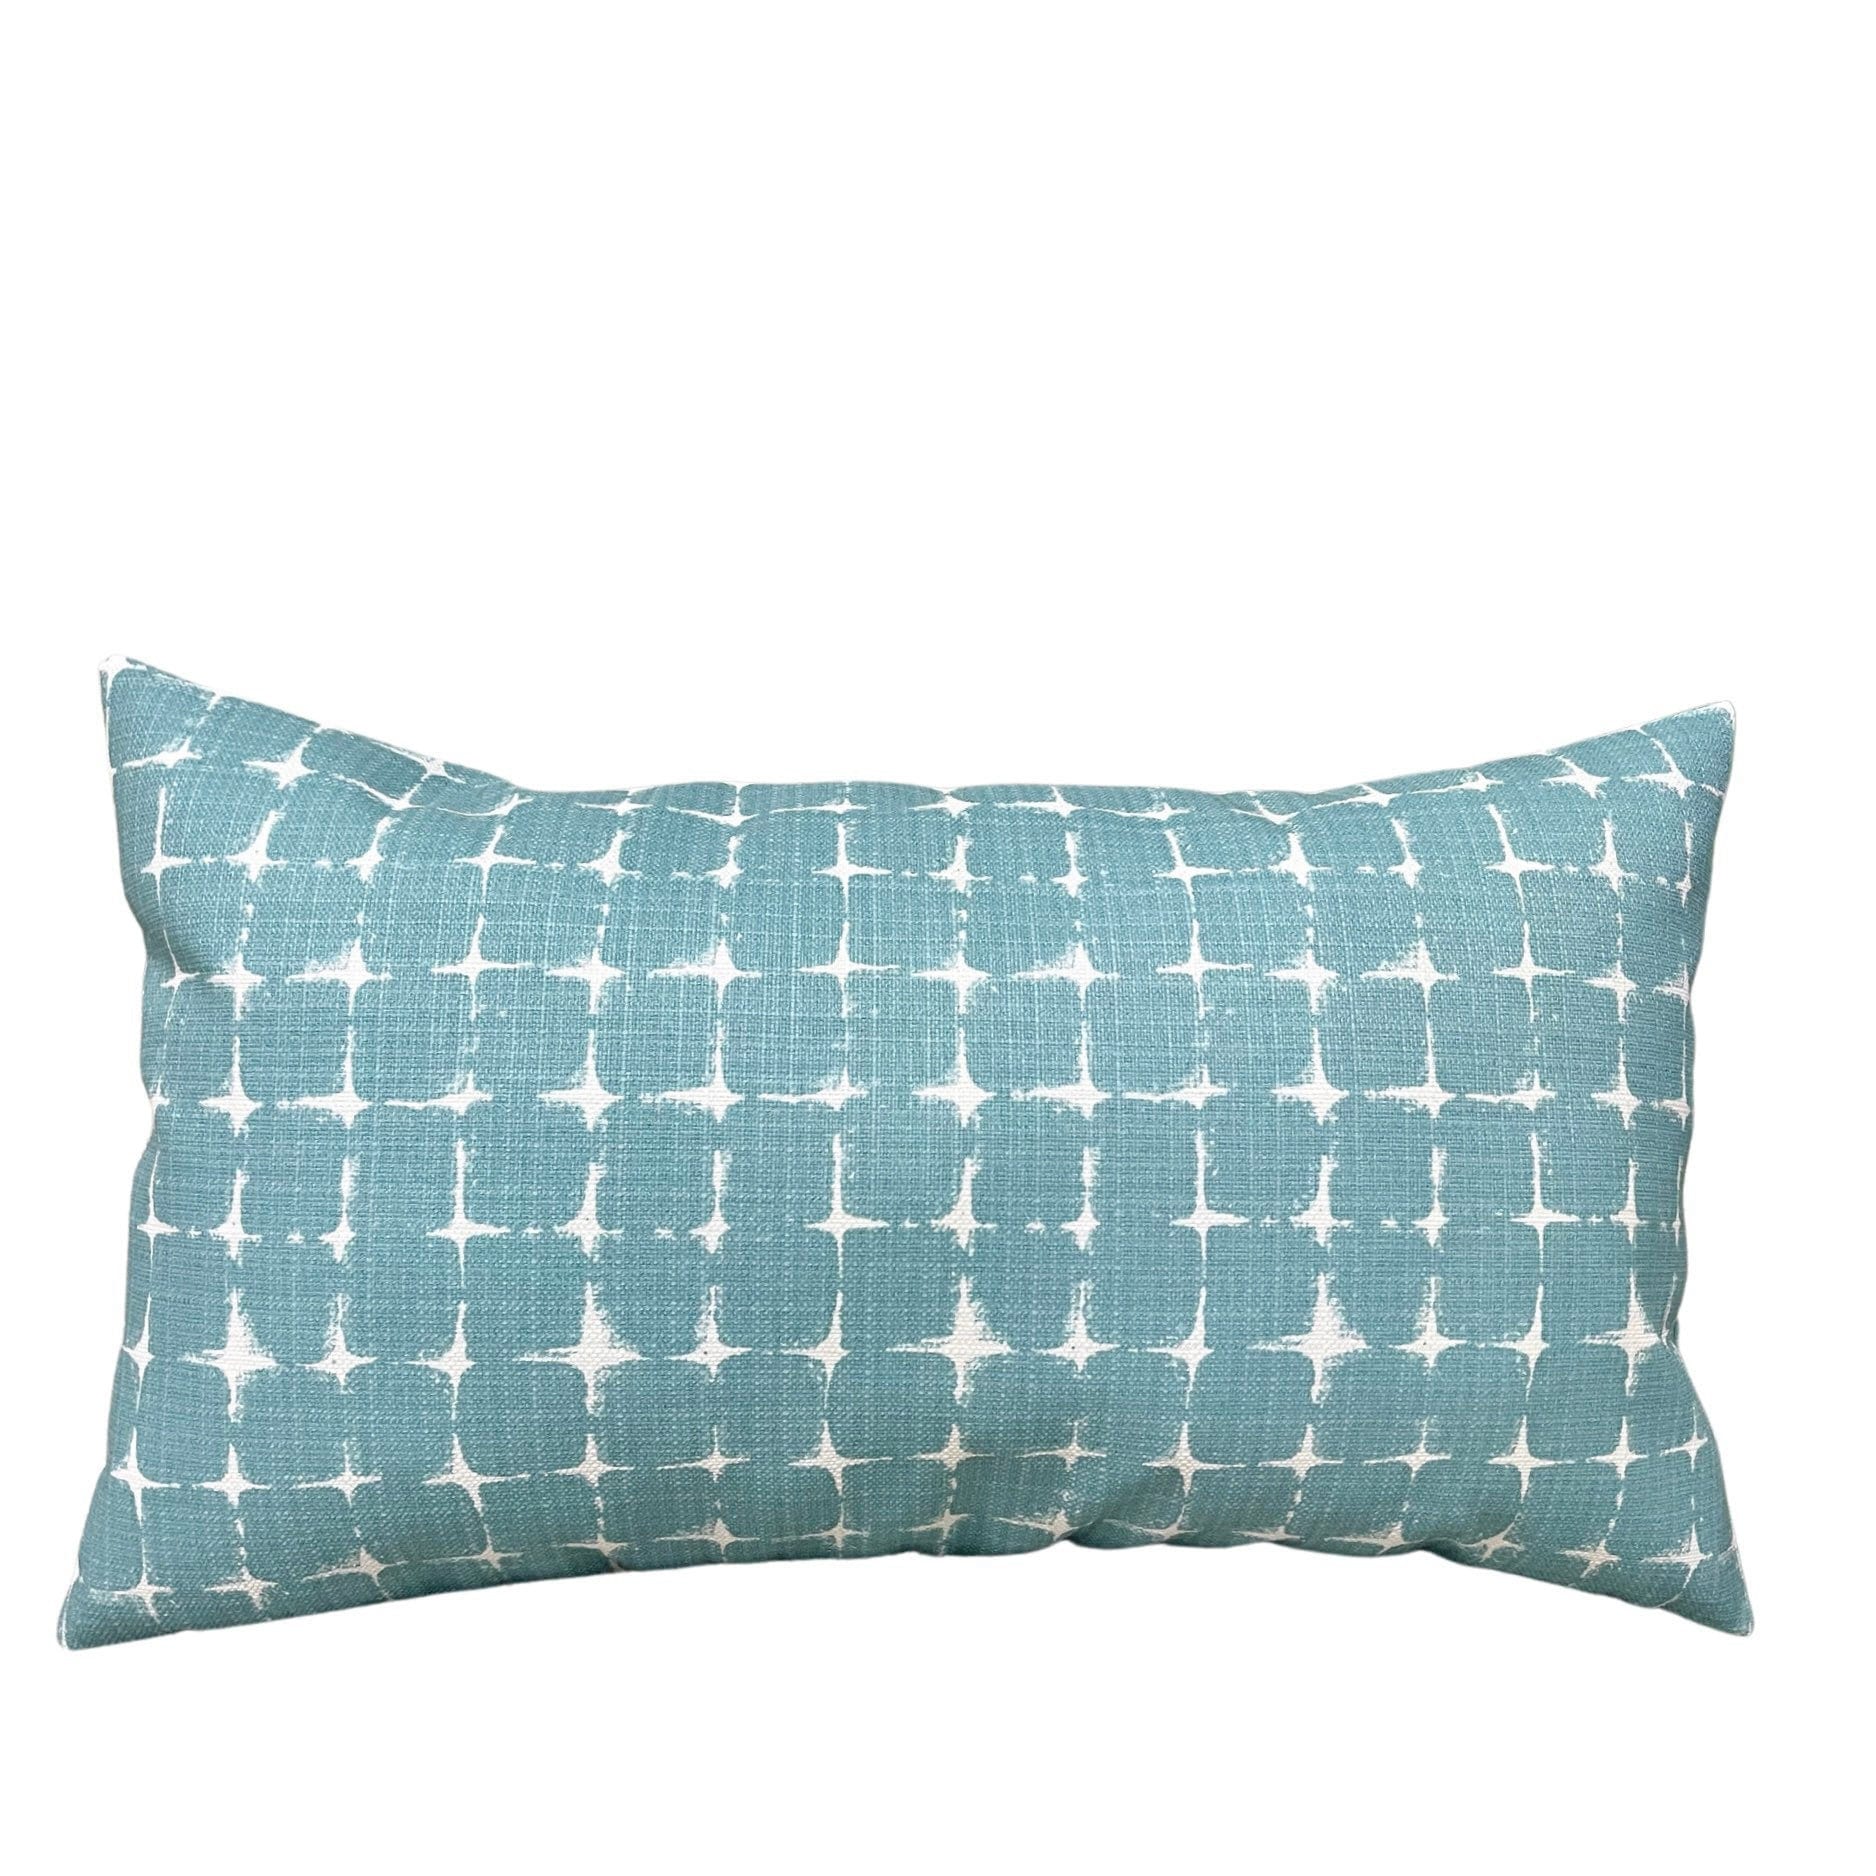 Aqua Gray & Teal Lumbar Support Pillows or Decorative Accent Throw Pillow  for Bed Decor, Couch Pillows Set or Blue Outdoor Sofa Cushions 